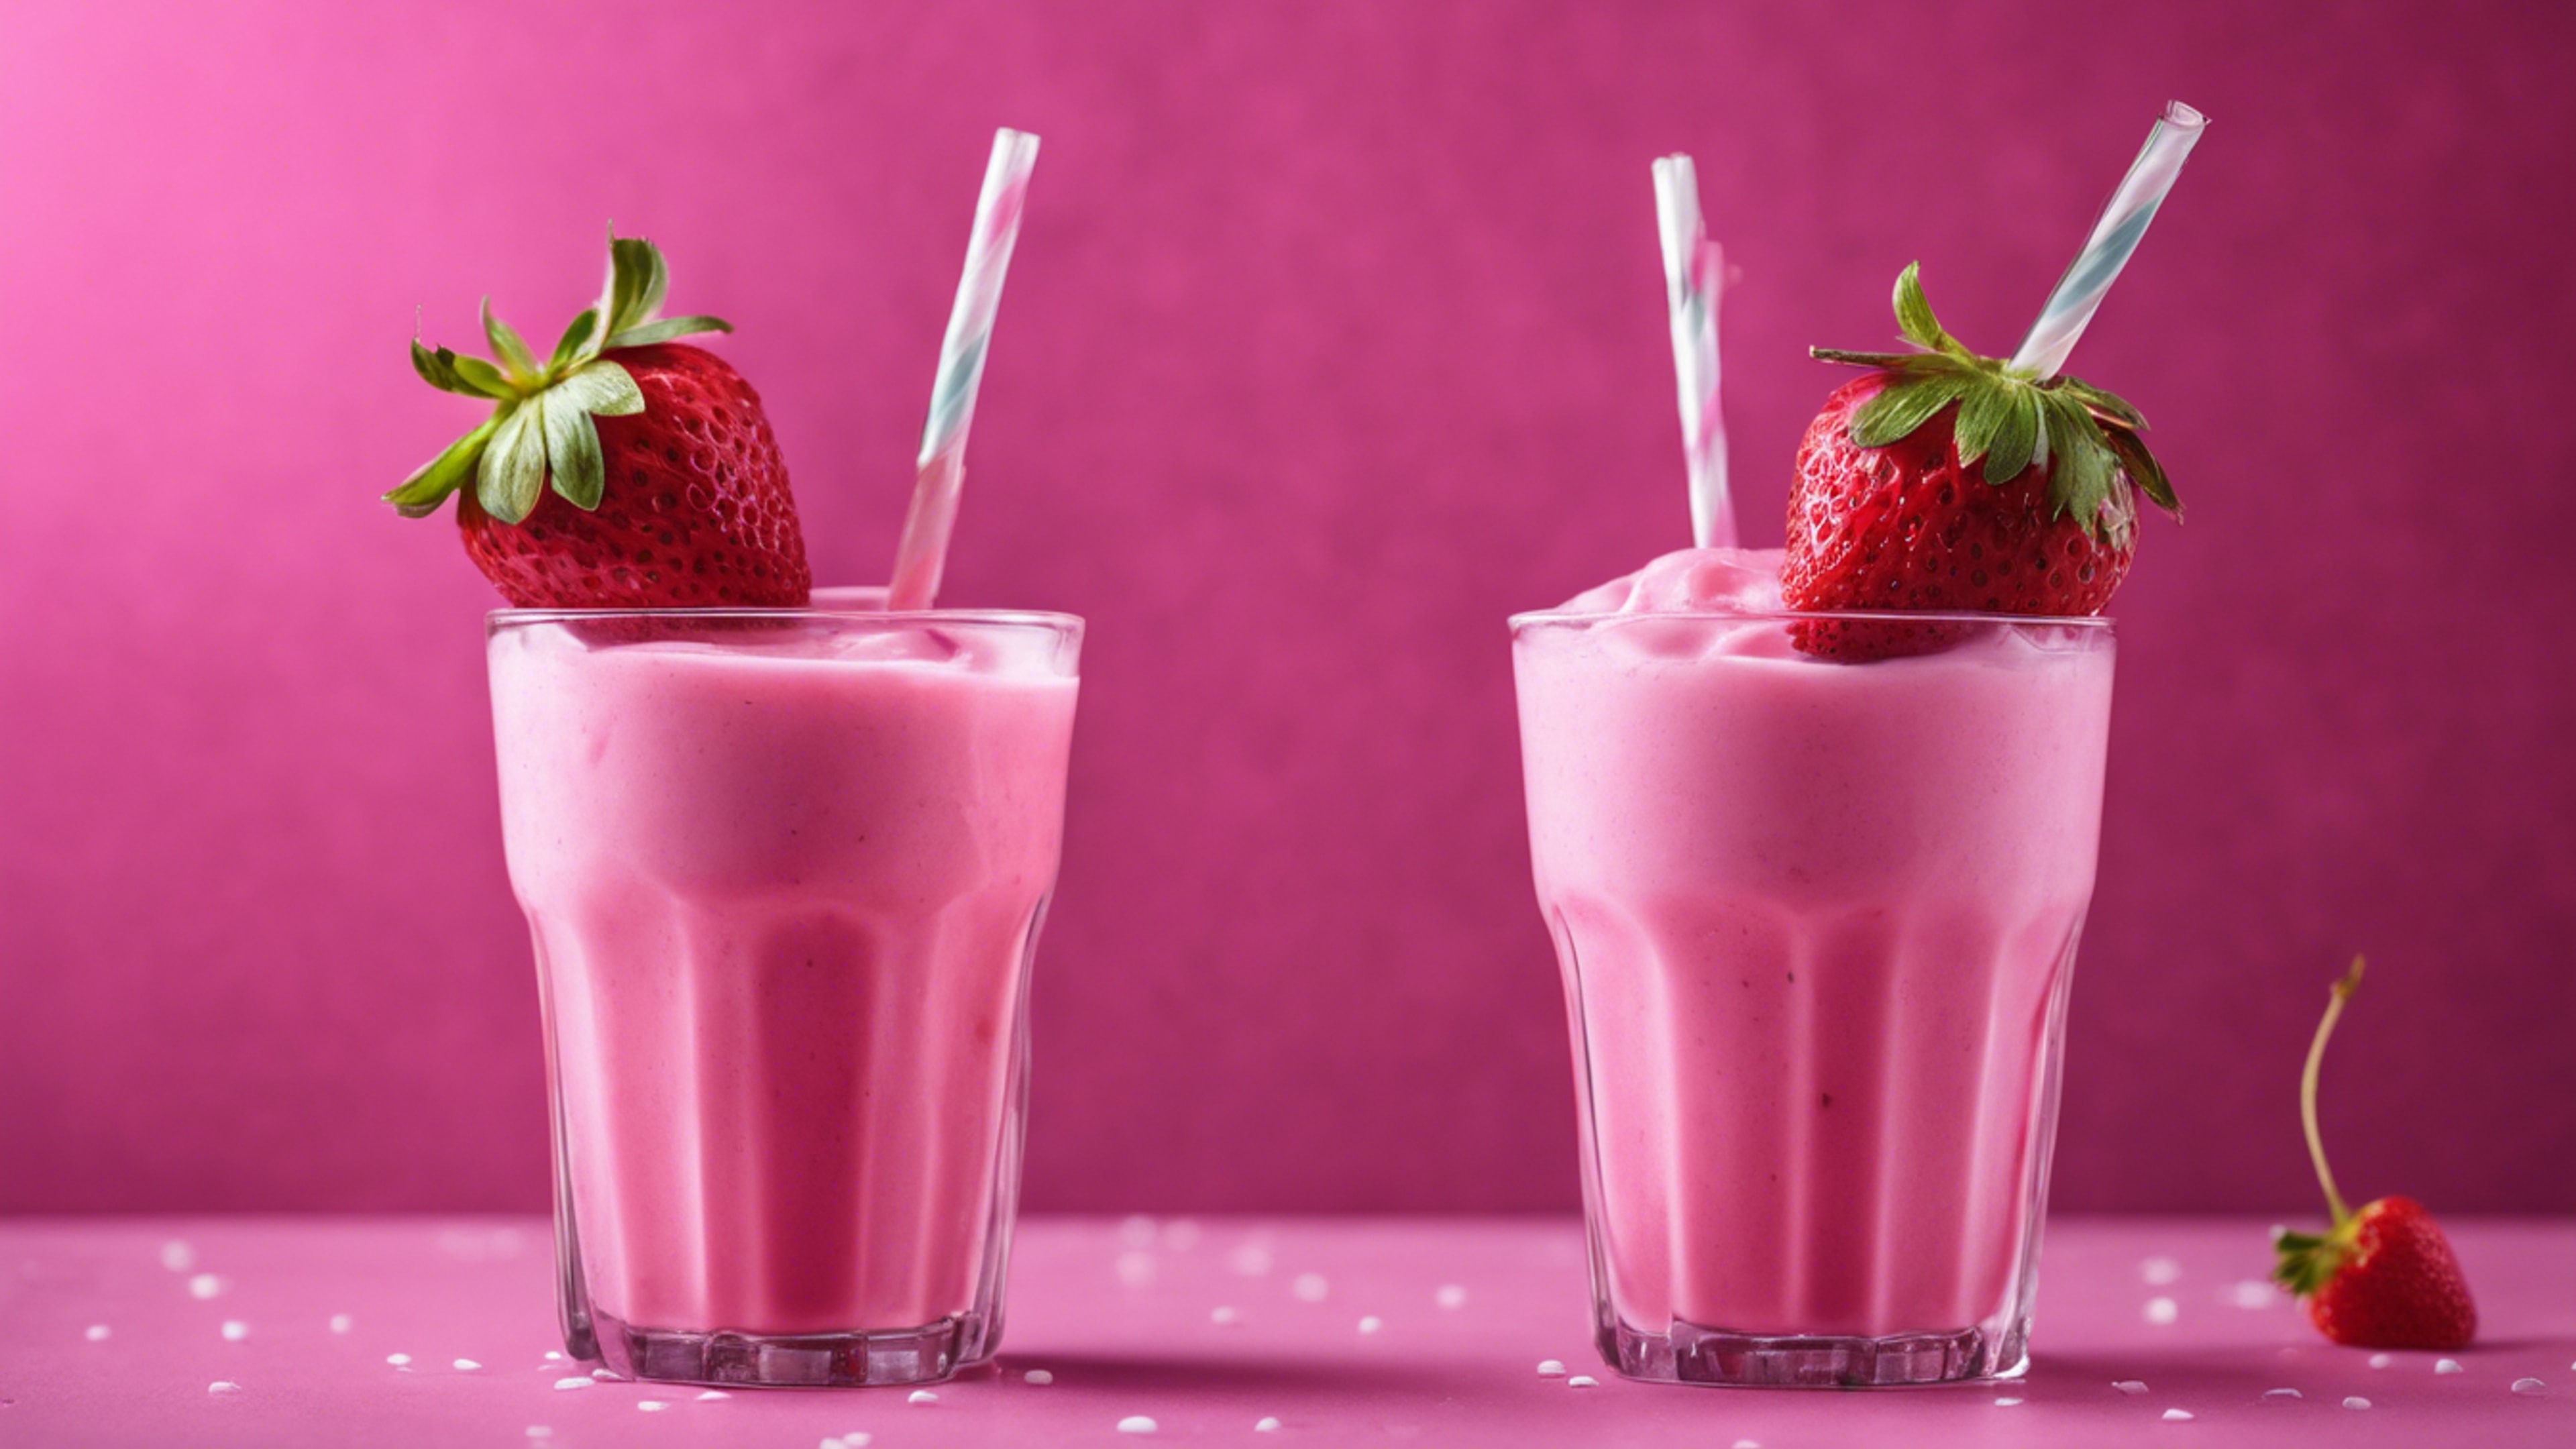 Two glasses filled with bright pink strawberry milkshake garnished with straws and cherries. Wallpaper[367e513037cf4f879d8a]